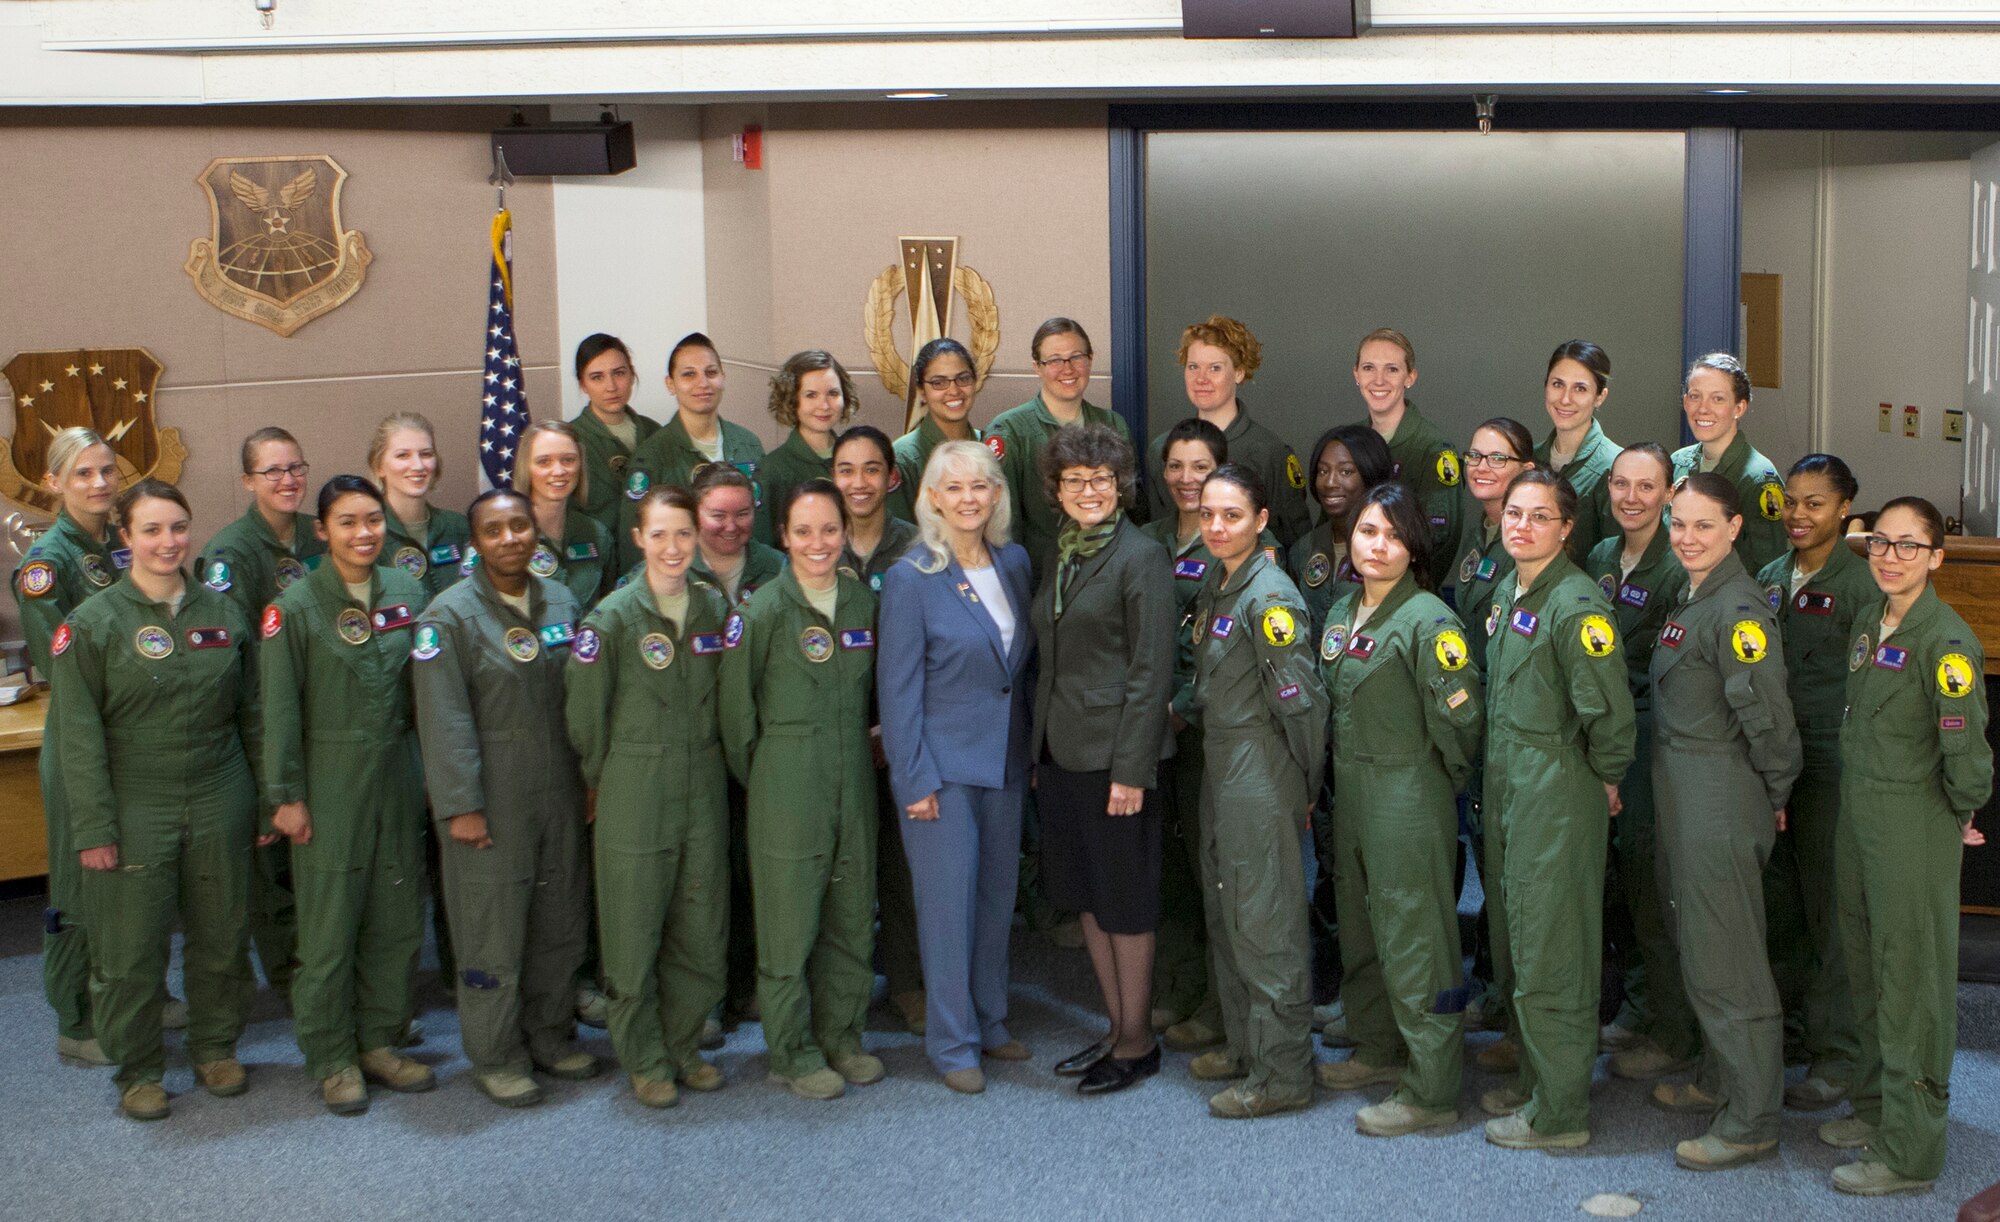 Missileers from the 90th Operations Group and Retired Col. Pat Fornes, the first female officer on a U.S. missile crew and the first female missile squadron commander; and Retired Col. Linda Aldrich, first female Minuteman ICBM crew member pose for a group photo on F.E. Warren Air Force Base, Wyo., March 22, 2016. In commemoration of Women's History Month, 90 all-female missileers within 20th Air Force pulled a 24-hour alert. (U.S. Air Force photo by Lan Kim)